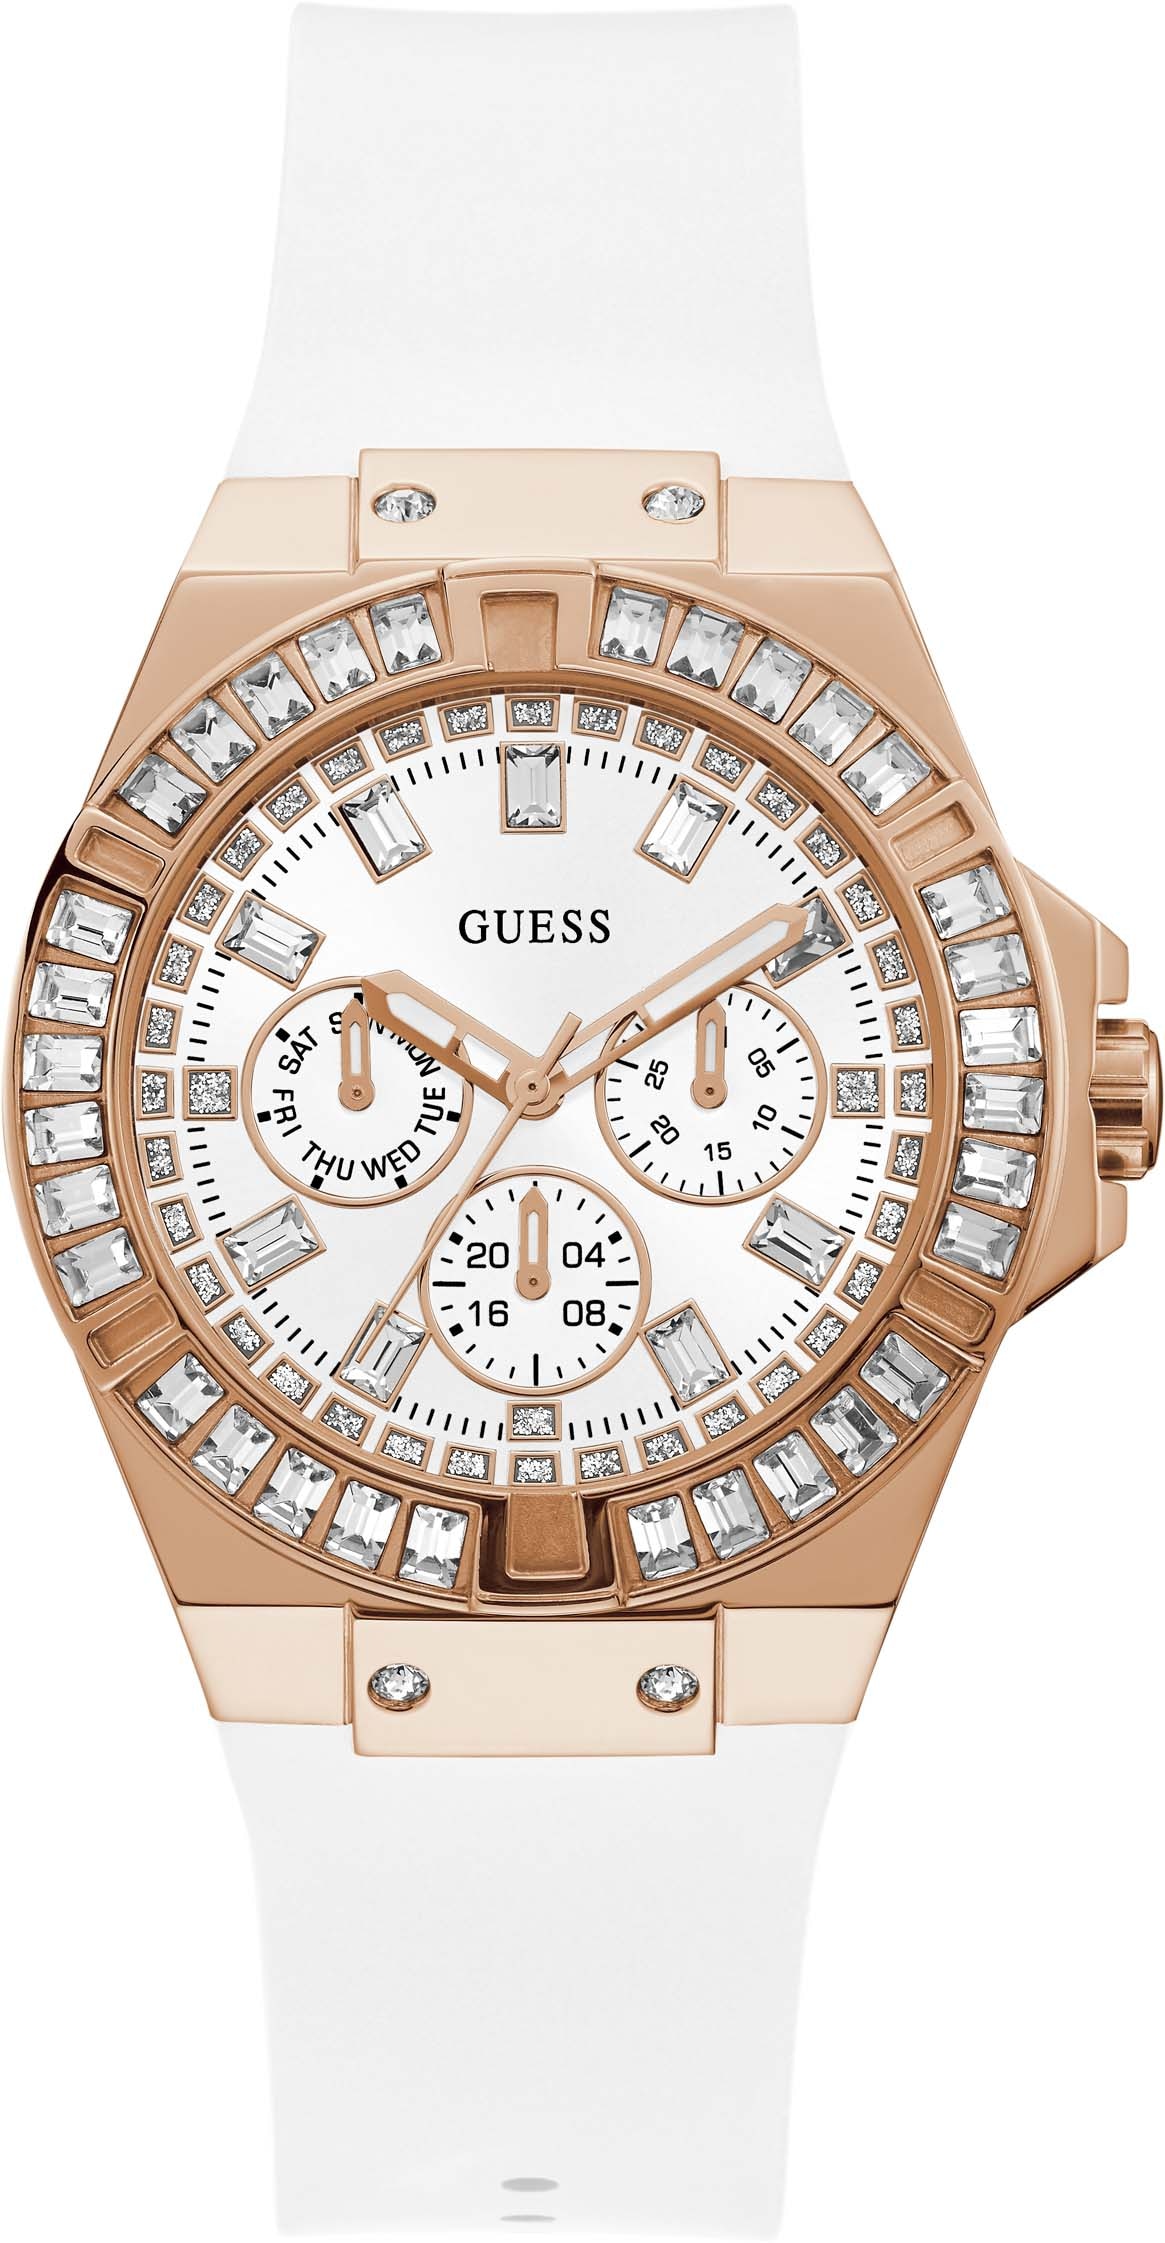 Guess Multifunktionsuhr »GW0118L4« bei OTTOversand